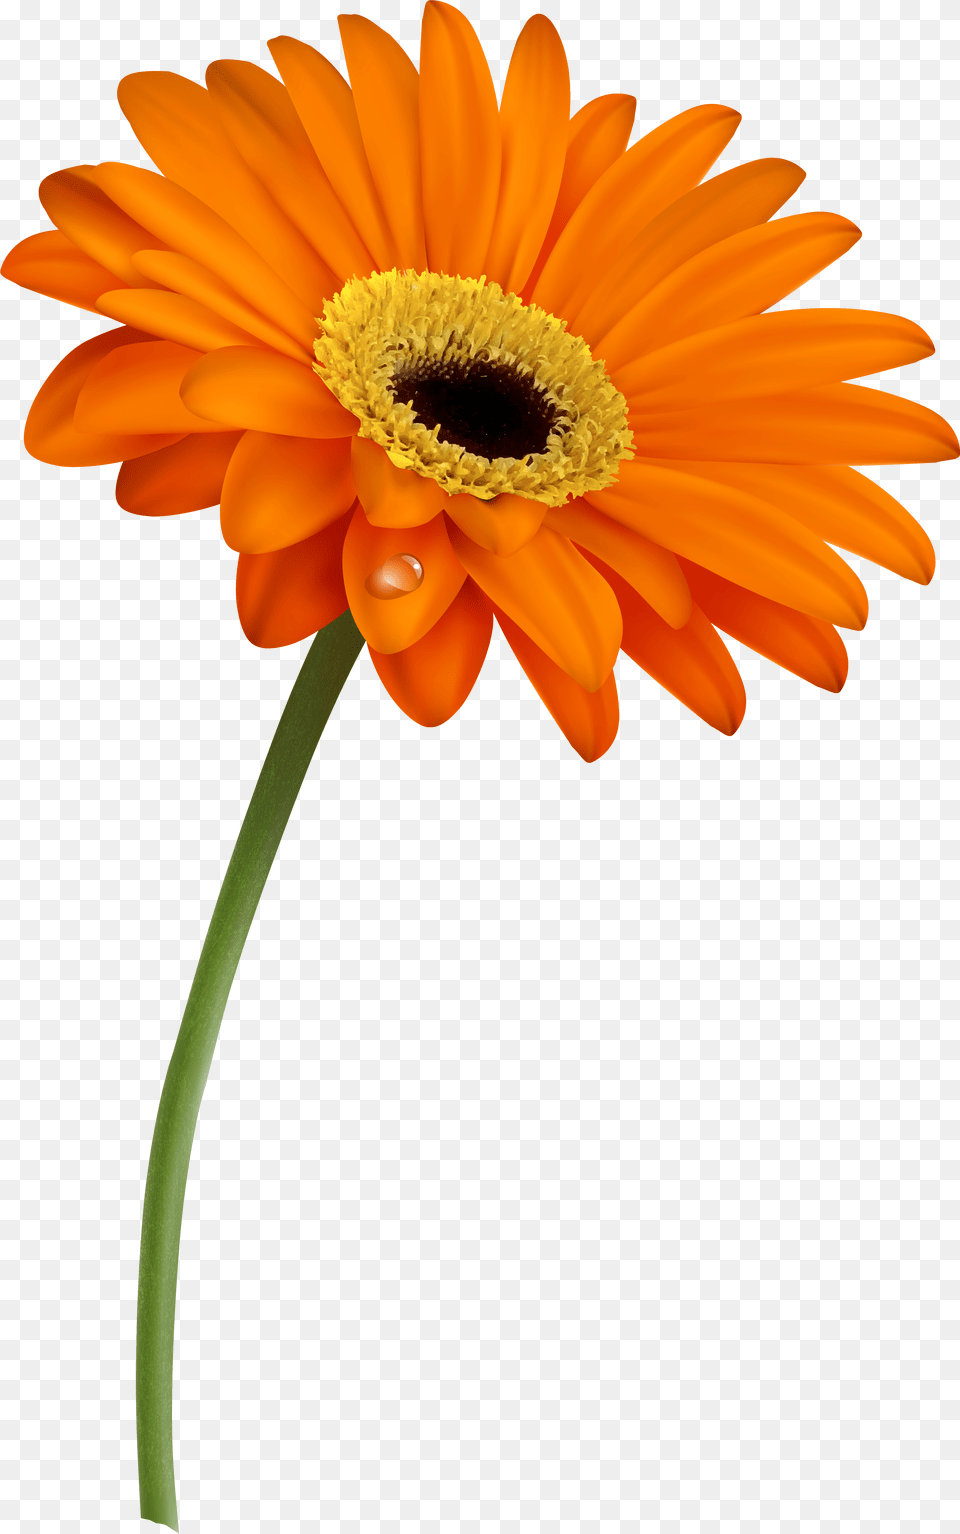 Grass With Flowers And Butterfly Transparent Cartoons Gerbera Daisy Clipart, Flower, Petal, Plant, Pollen Png Image